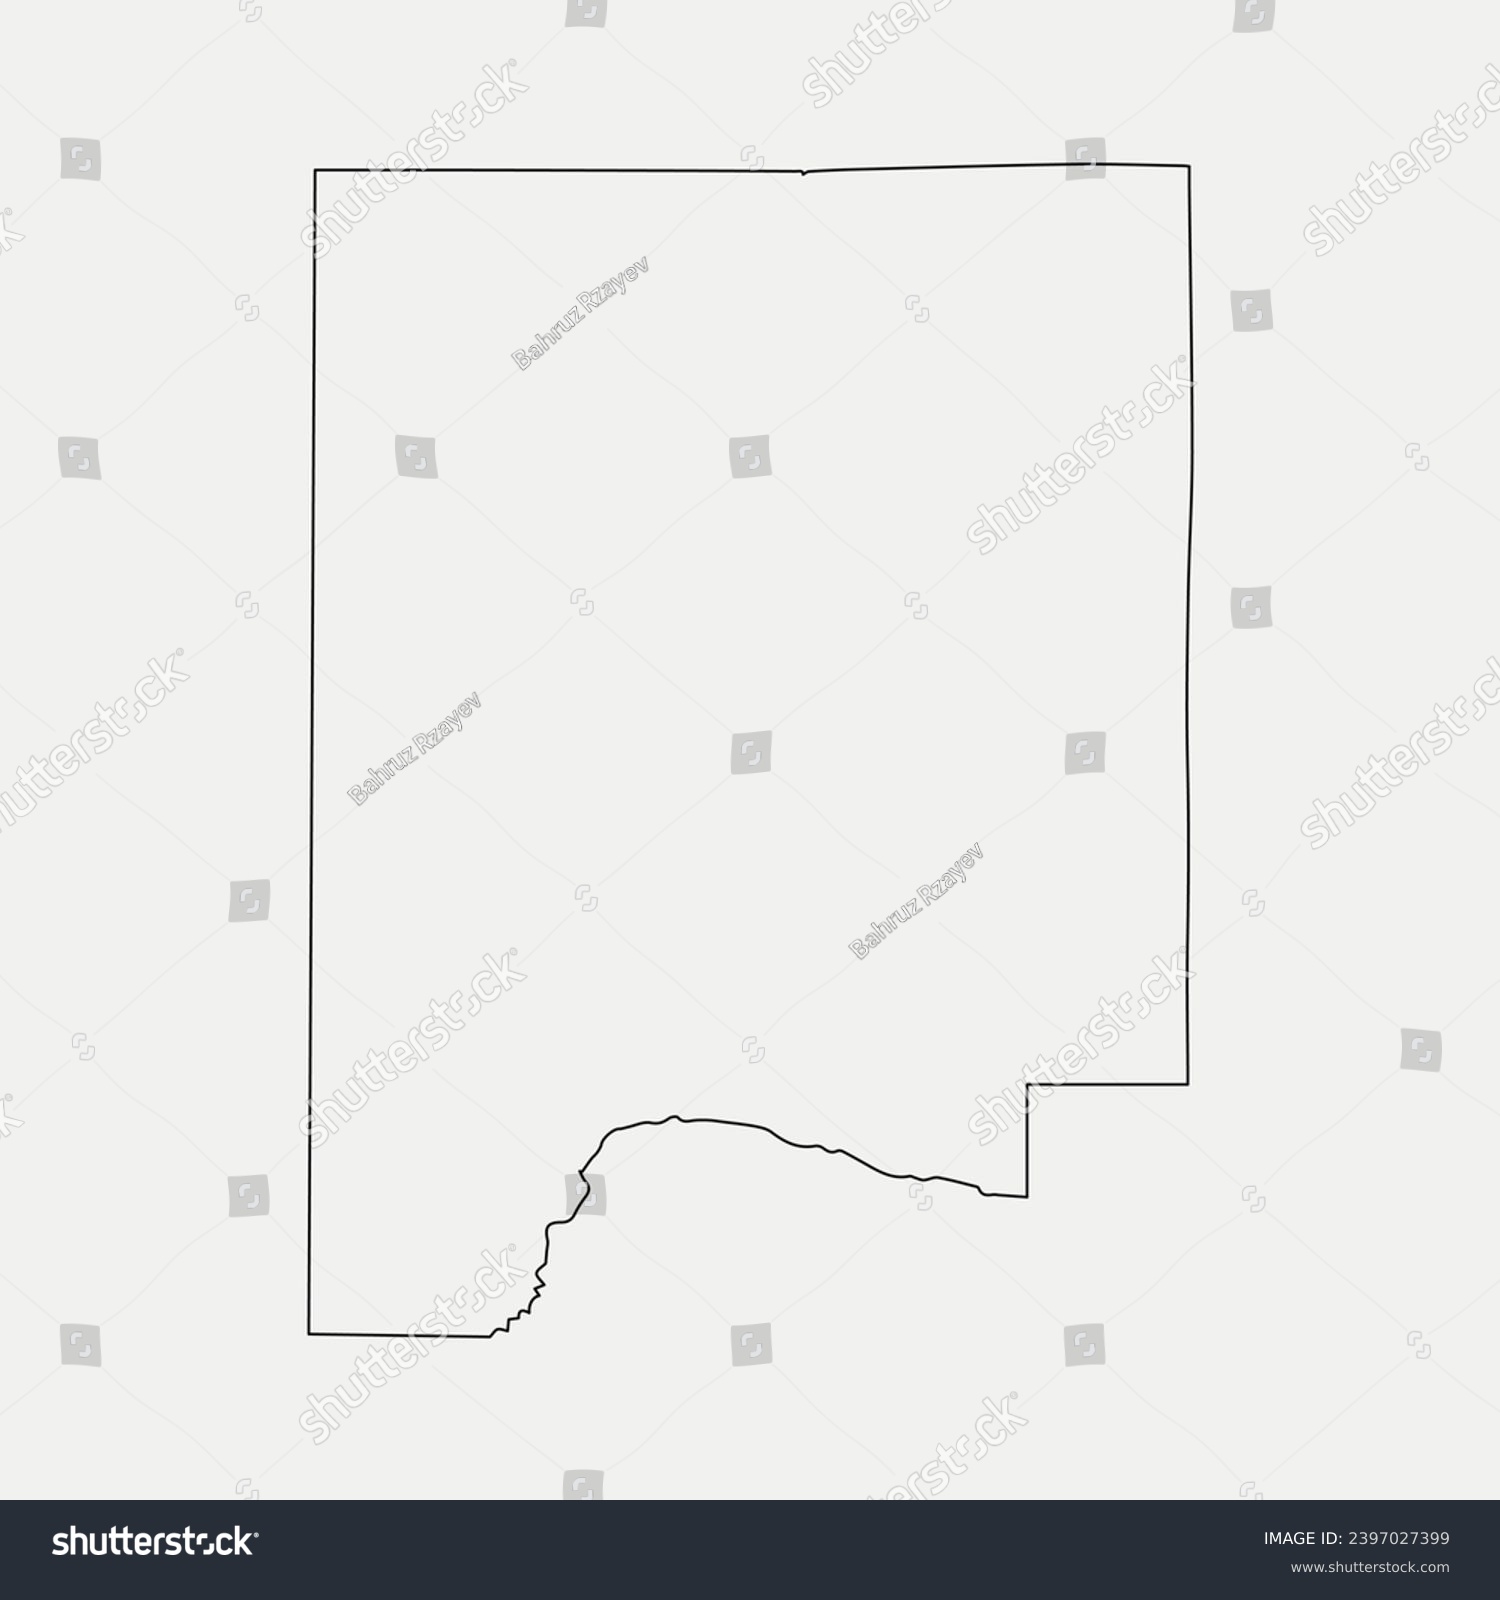 SVG of Map of Dale County - Alabama - United States outline silhouette graphic element Illustration template design
 svg